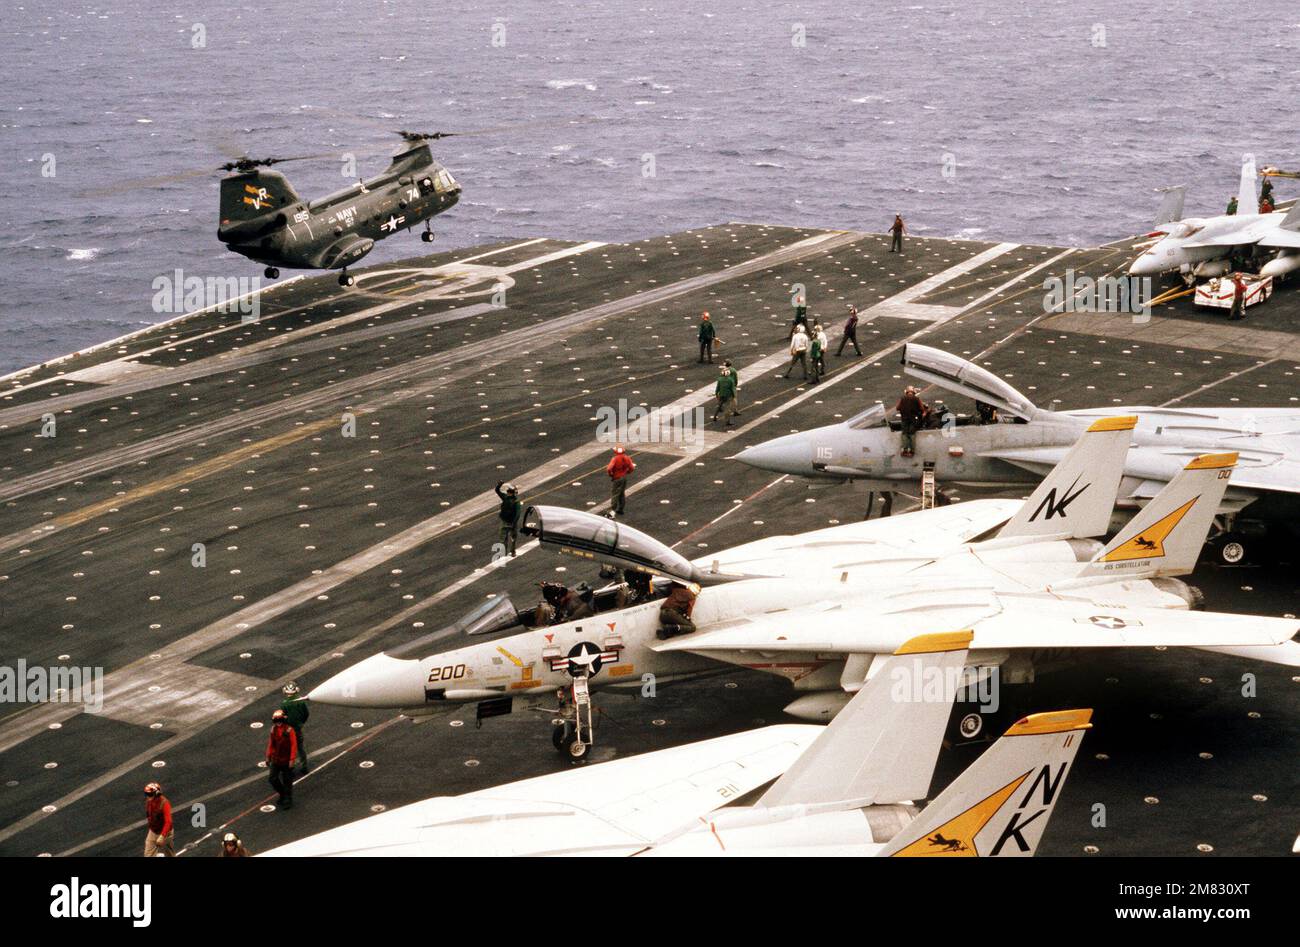 A UH-46D Sea Knight helicopter from the ammunition ship USS KISKA (AE 35) hovers above the flight deck of the aircraft carrier USS CONSTELLATION (CV 64) during Fleet Exercise 85. In the foreground are several F-14A Tomcat aircraft from Fighter Squadron 21. On the far right is an F/A-18A Hornet aircraft. Country: Pacific Ocean (POC) Stock Photo